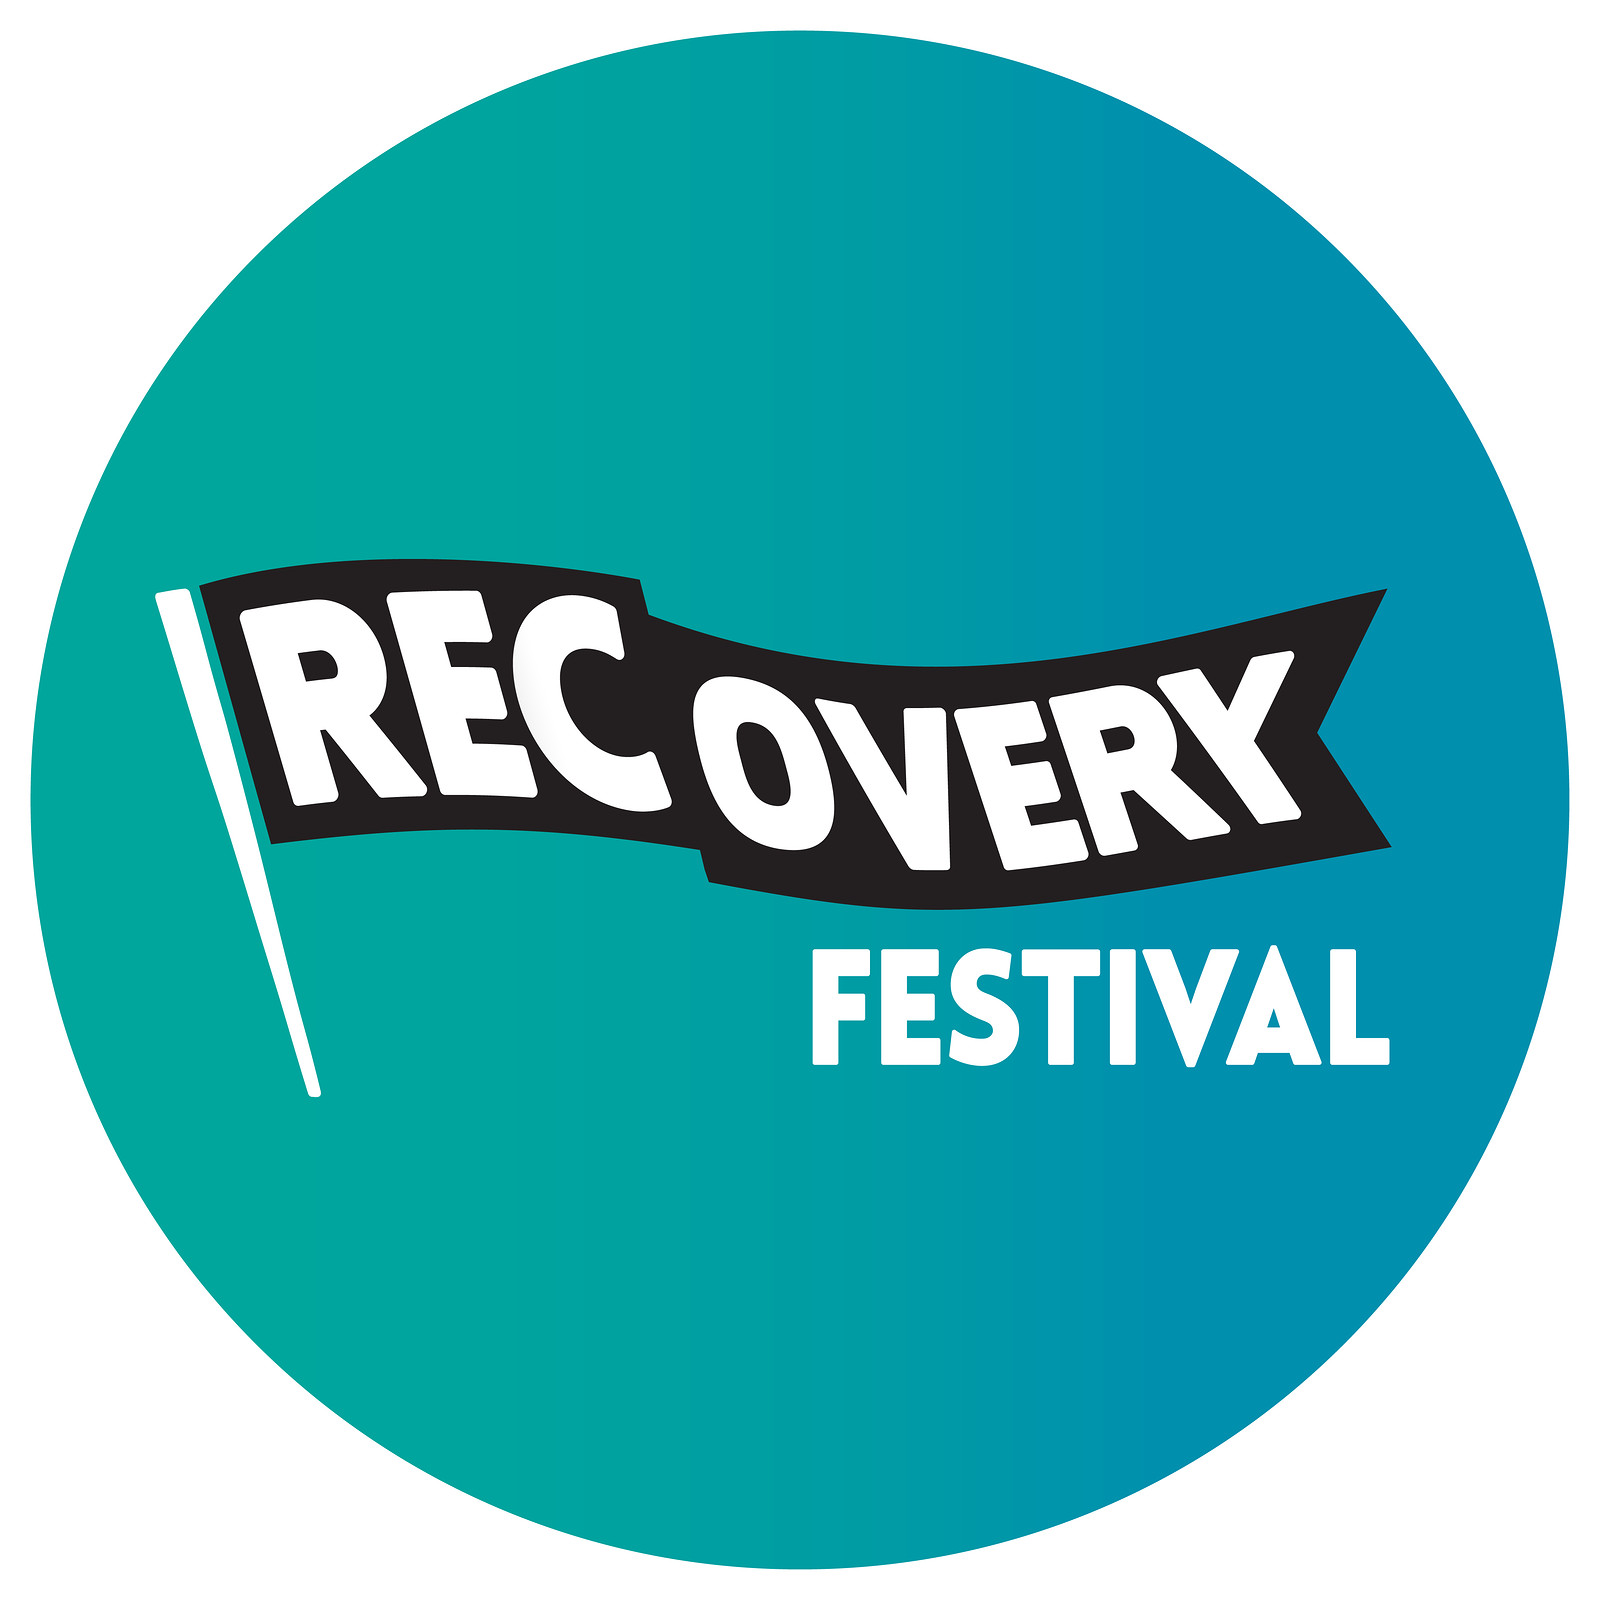 Recovery Festival 2019 at St Agnes Park, BS2 9LJ